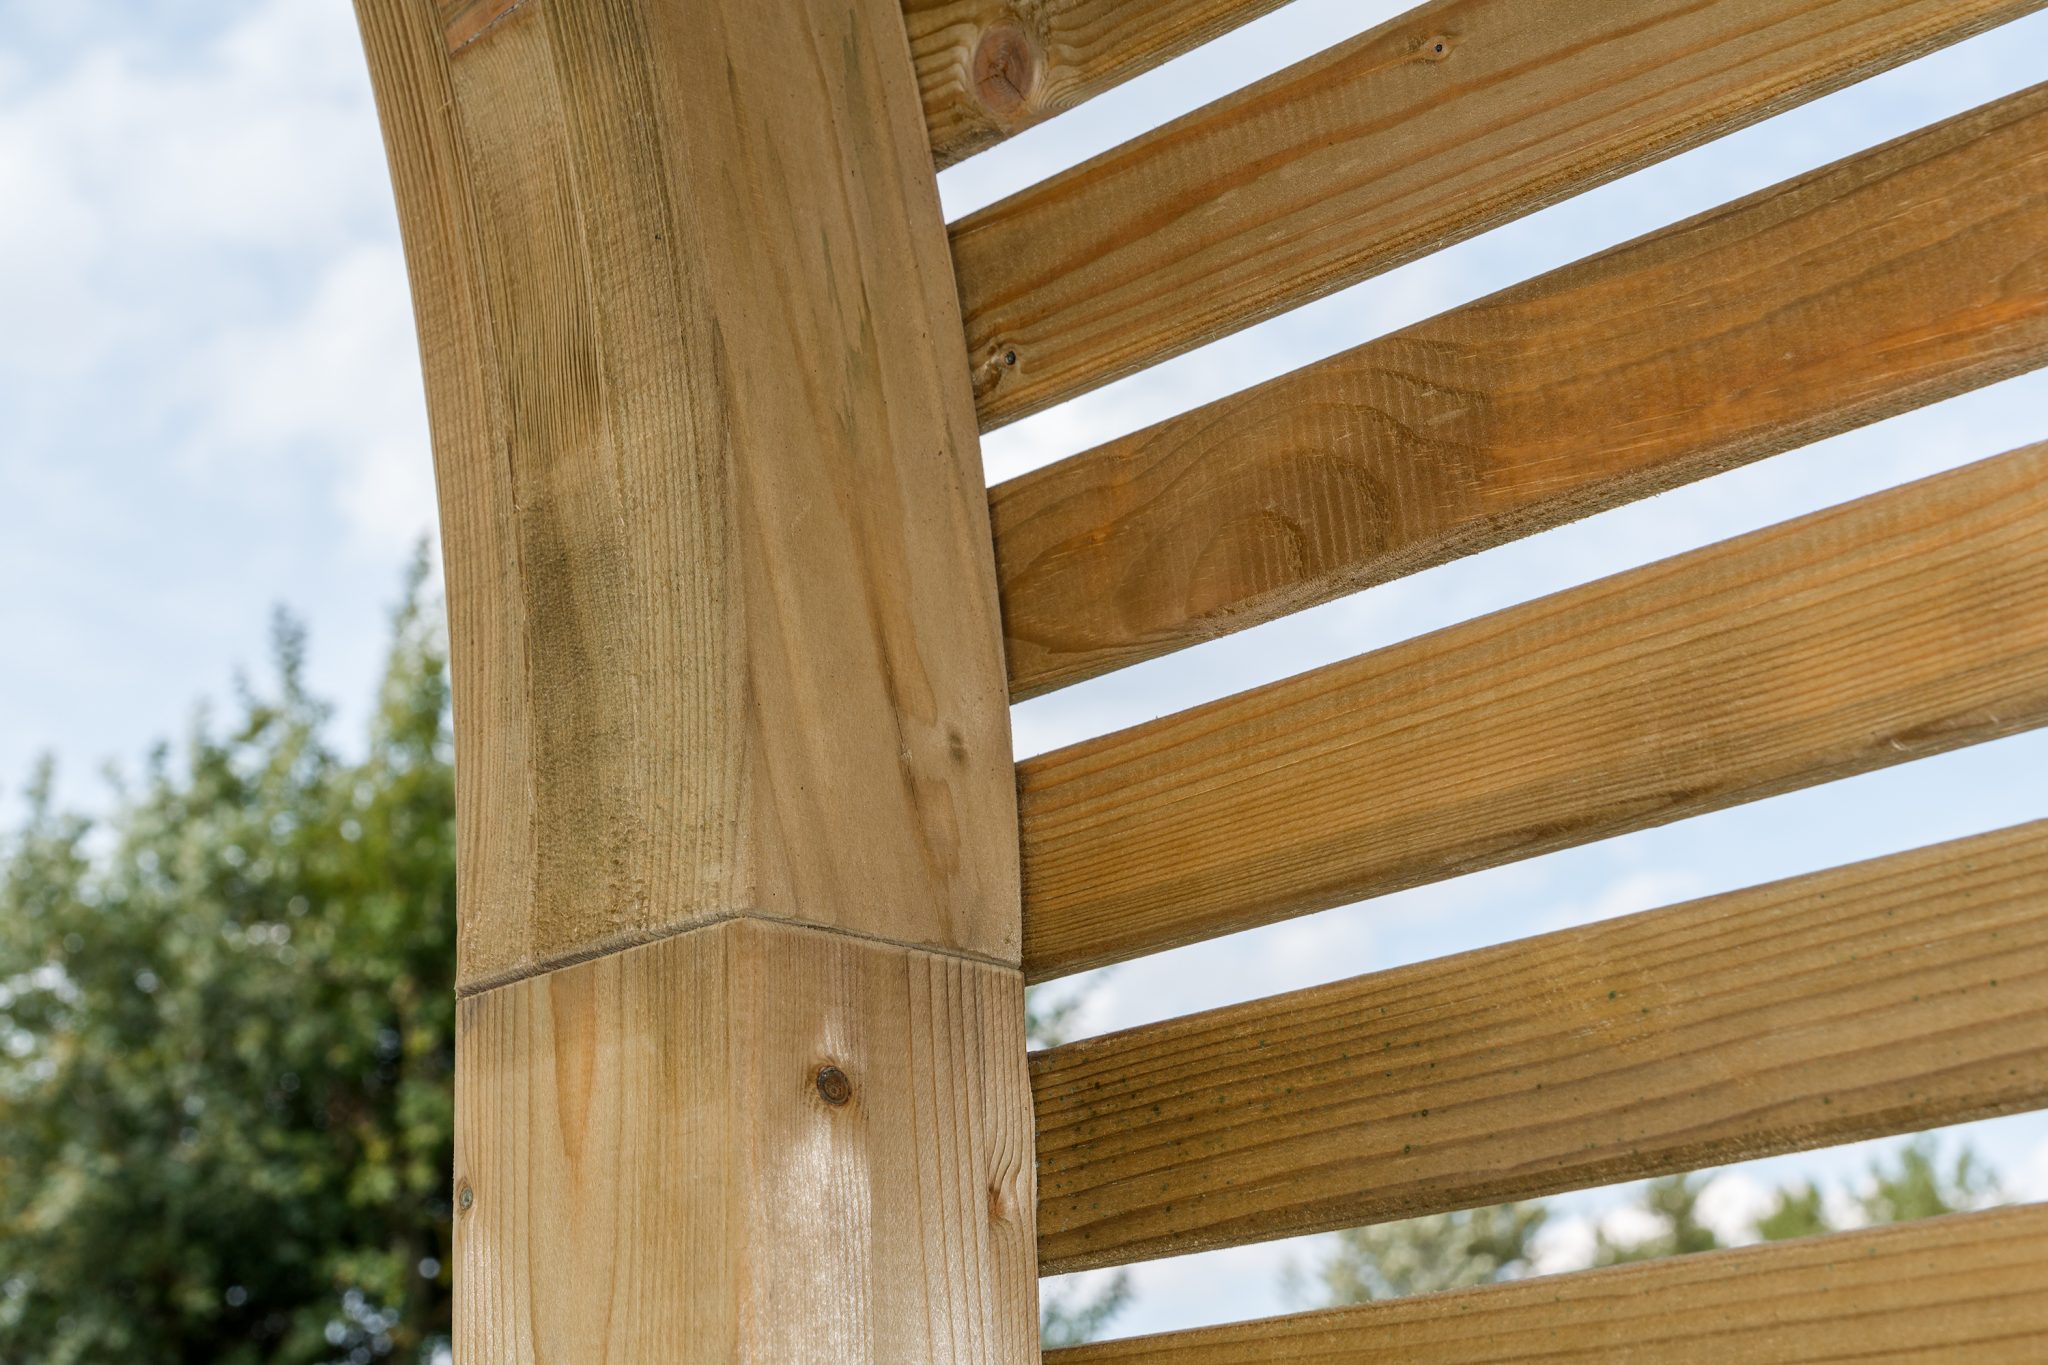 The Contemporary Garden Arch is a substantial and stylish structure. The chunky arched top, posts and slats are planed, rounded and chamfered for a modern look. Use with climbing plants along a pathway or as a standalone feature in your garden.